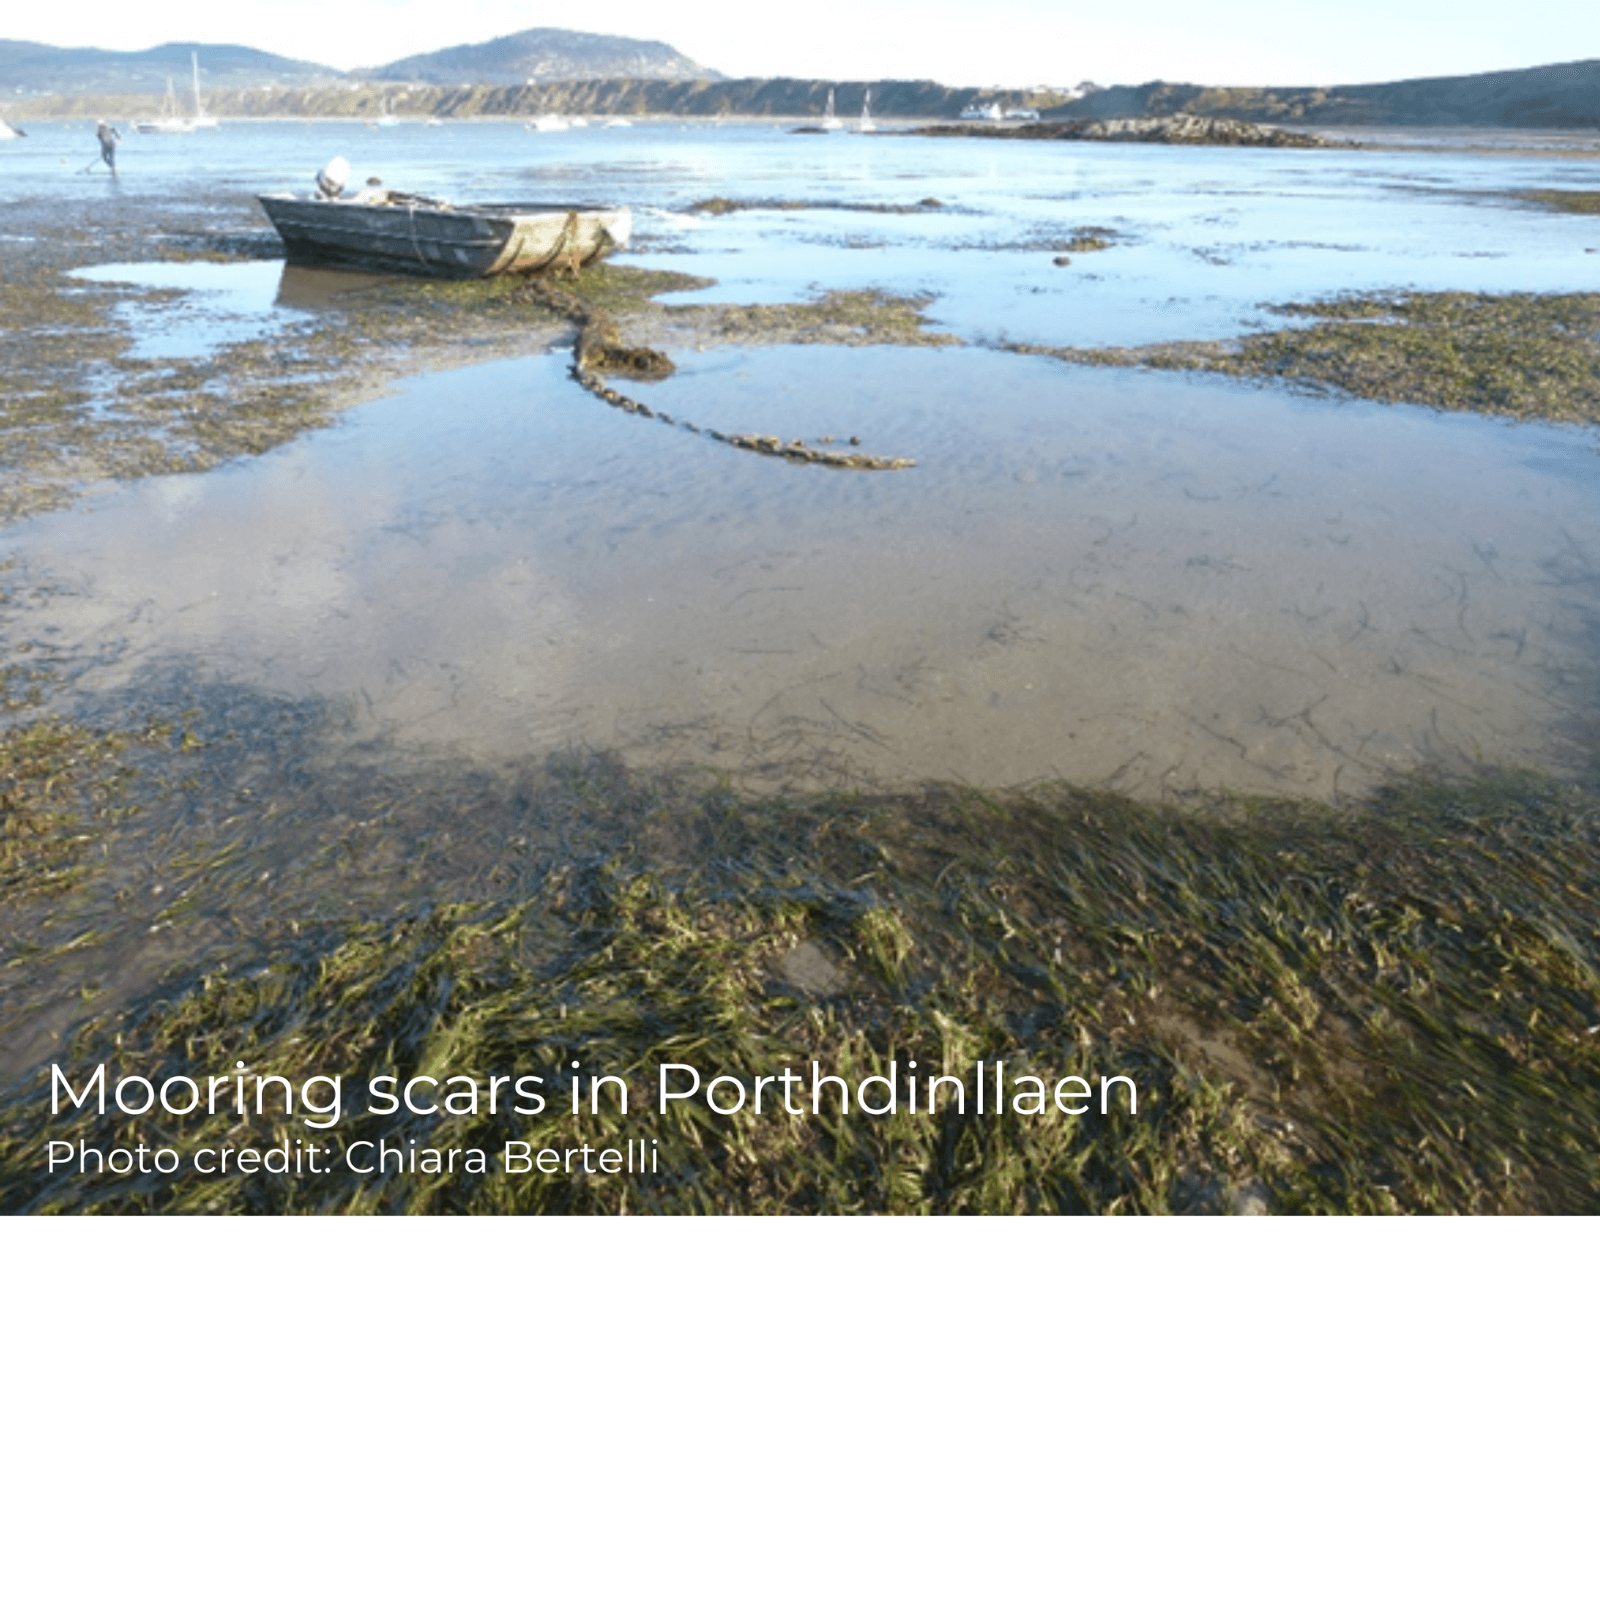 Mooring scars in Porthdinllaen. Advanced Mooring Systems could help to reduce this damage.